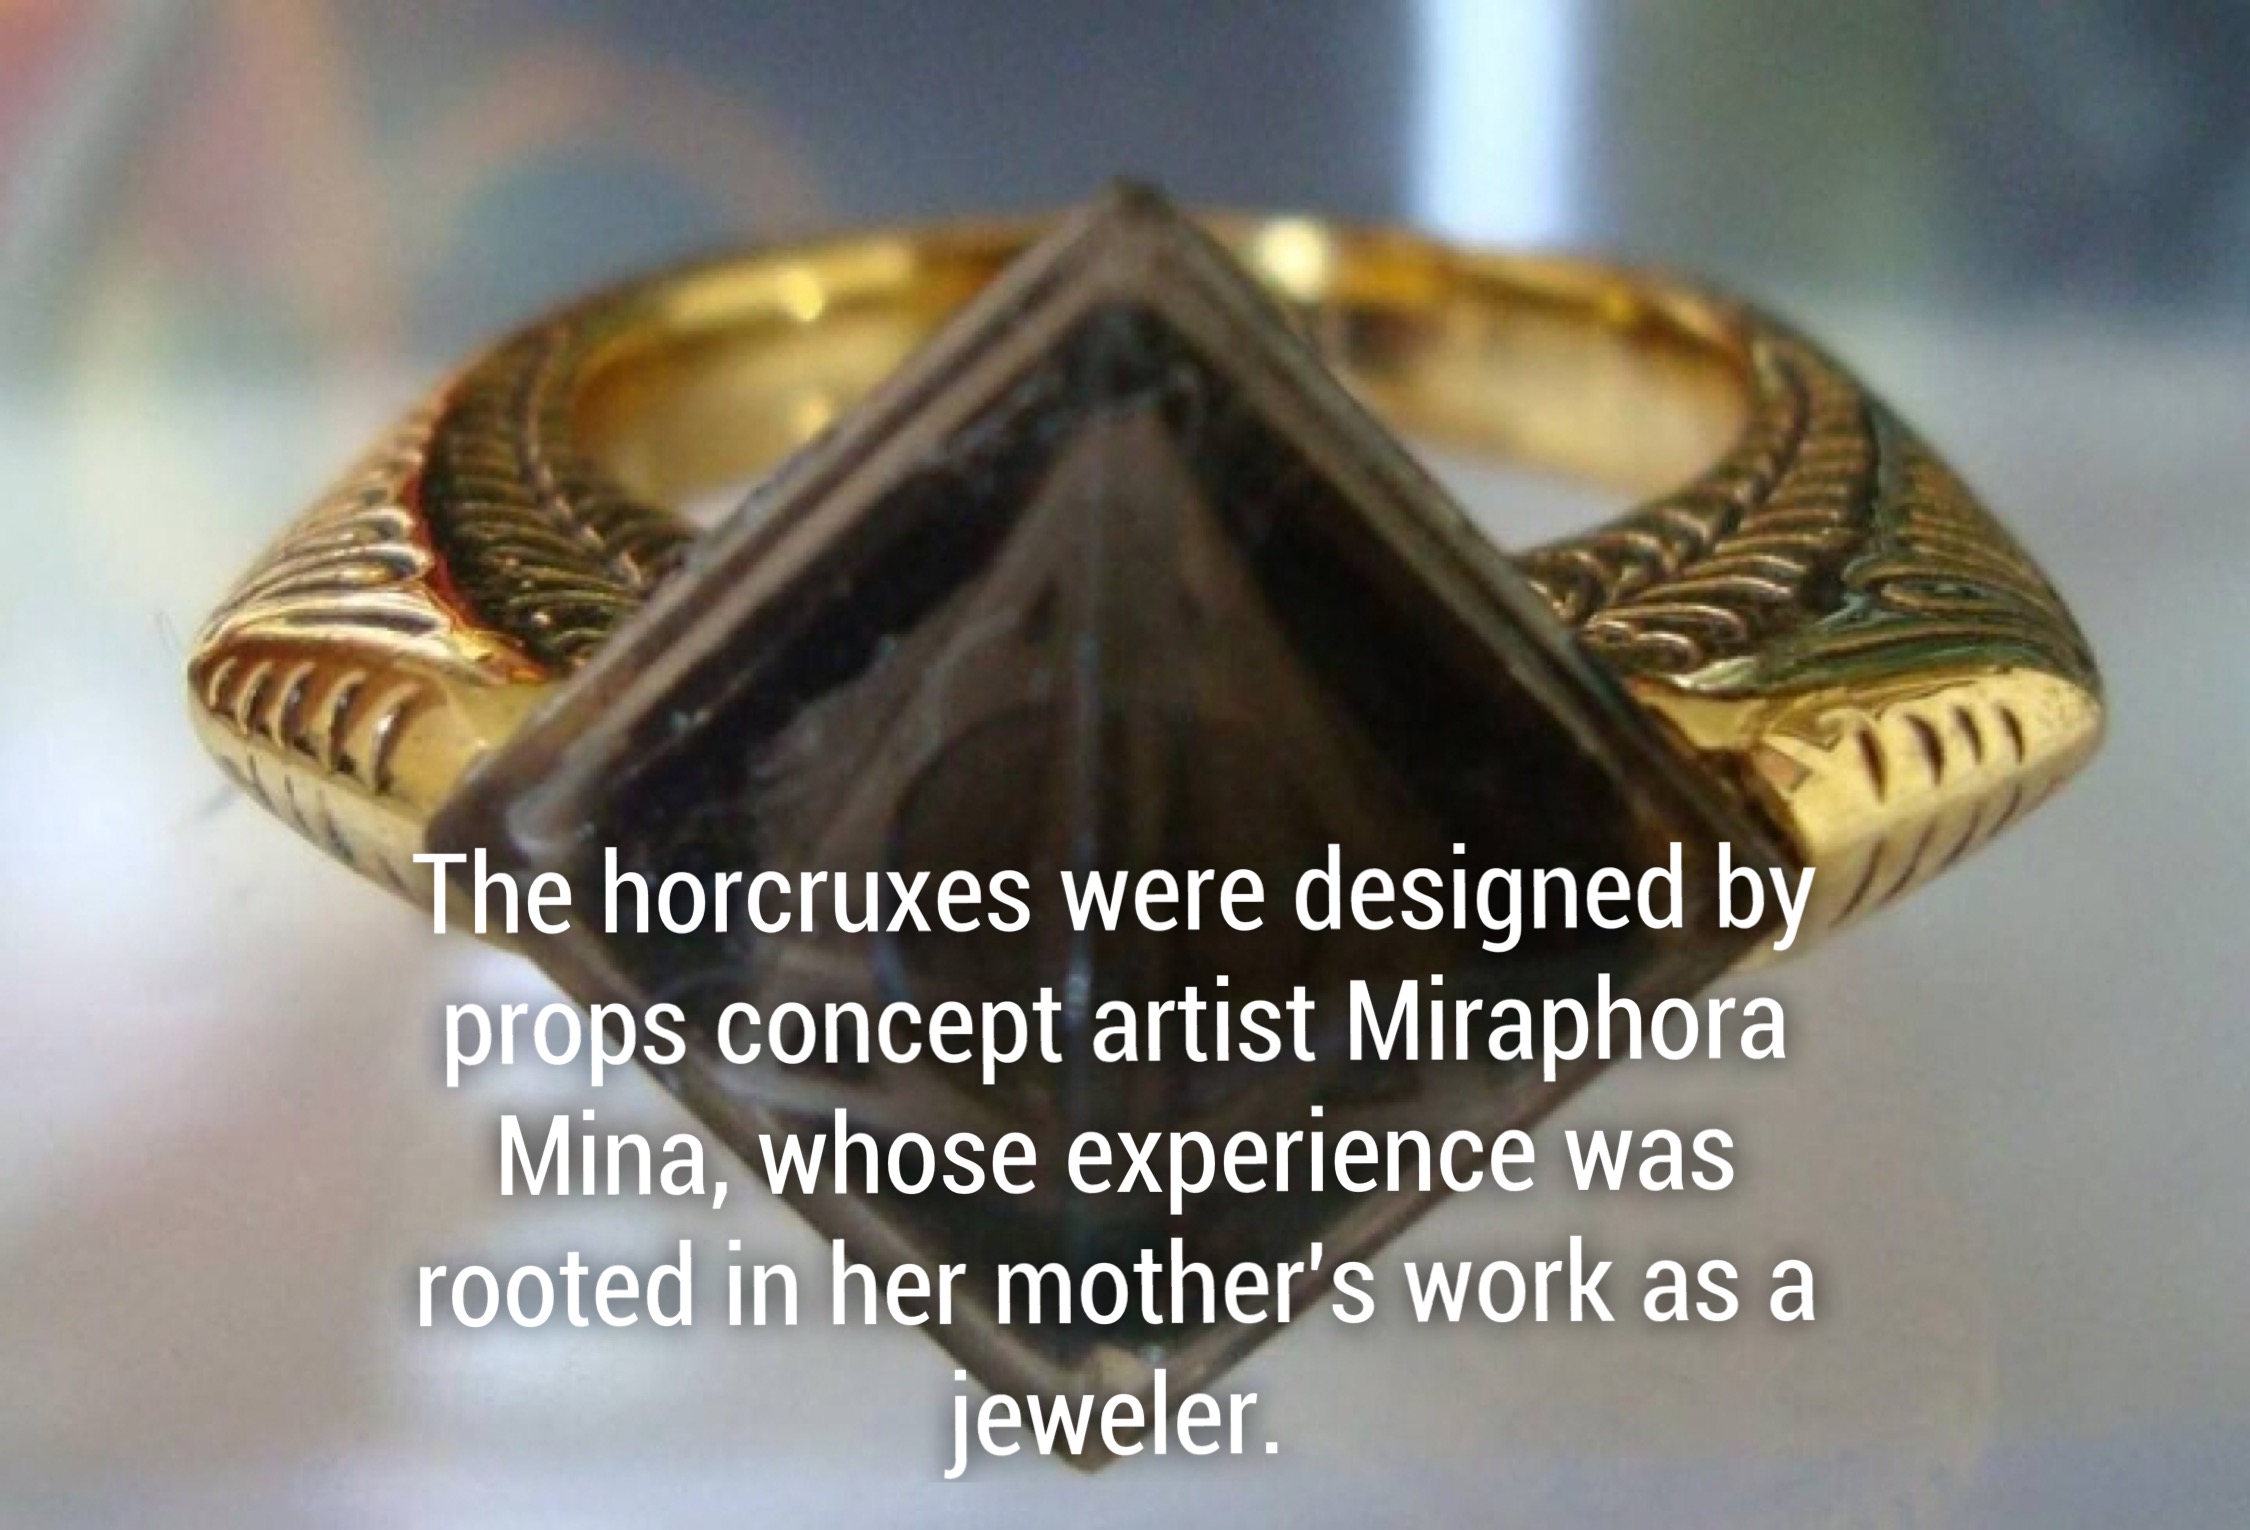 marvolo gaunt's ring - The horcruxes were designed by props concept artist Miraphora Mina, whose experience was rooted in her mother's work as a jeweler.